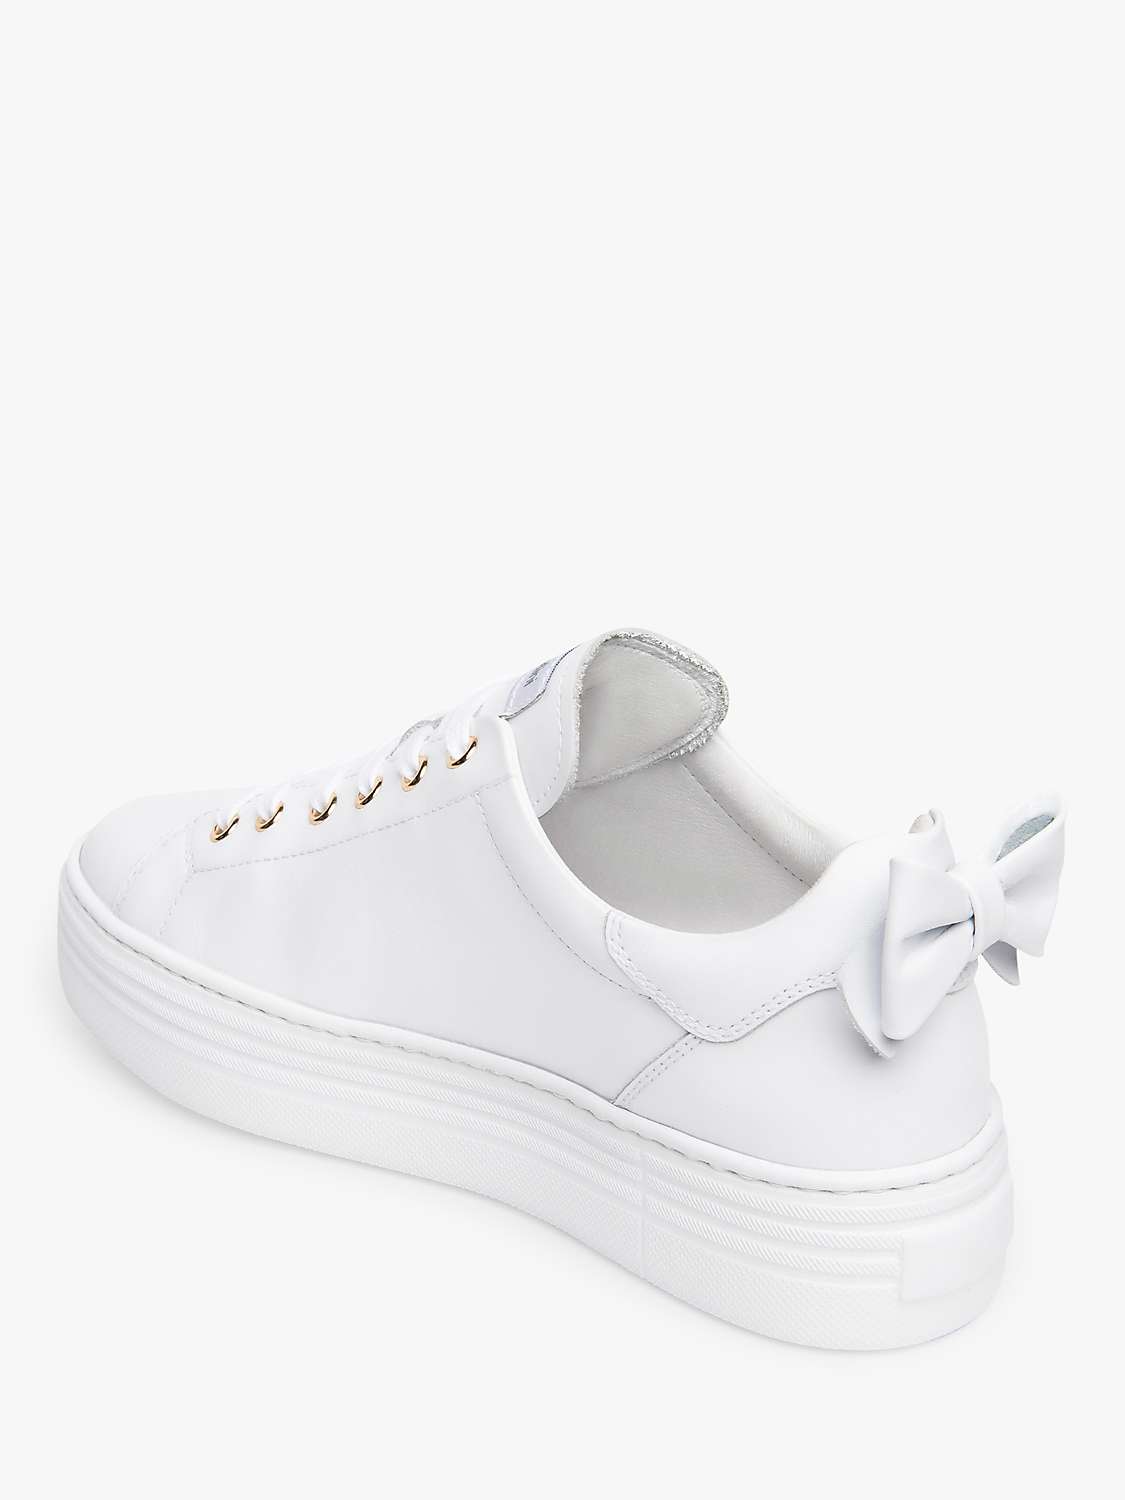 Buy NeroGiardini Bow Leather Trainers Online at johnlewis.com